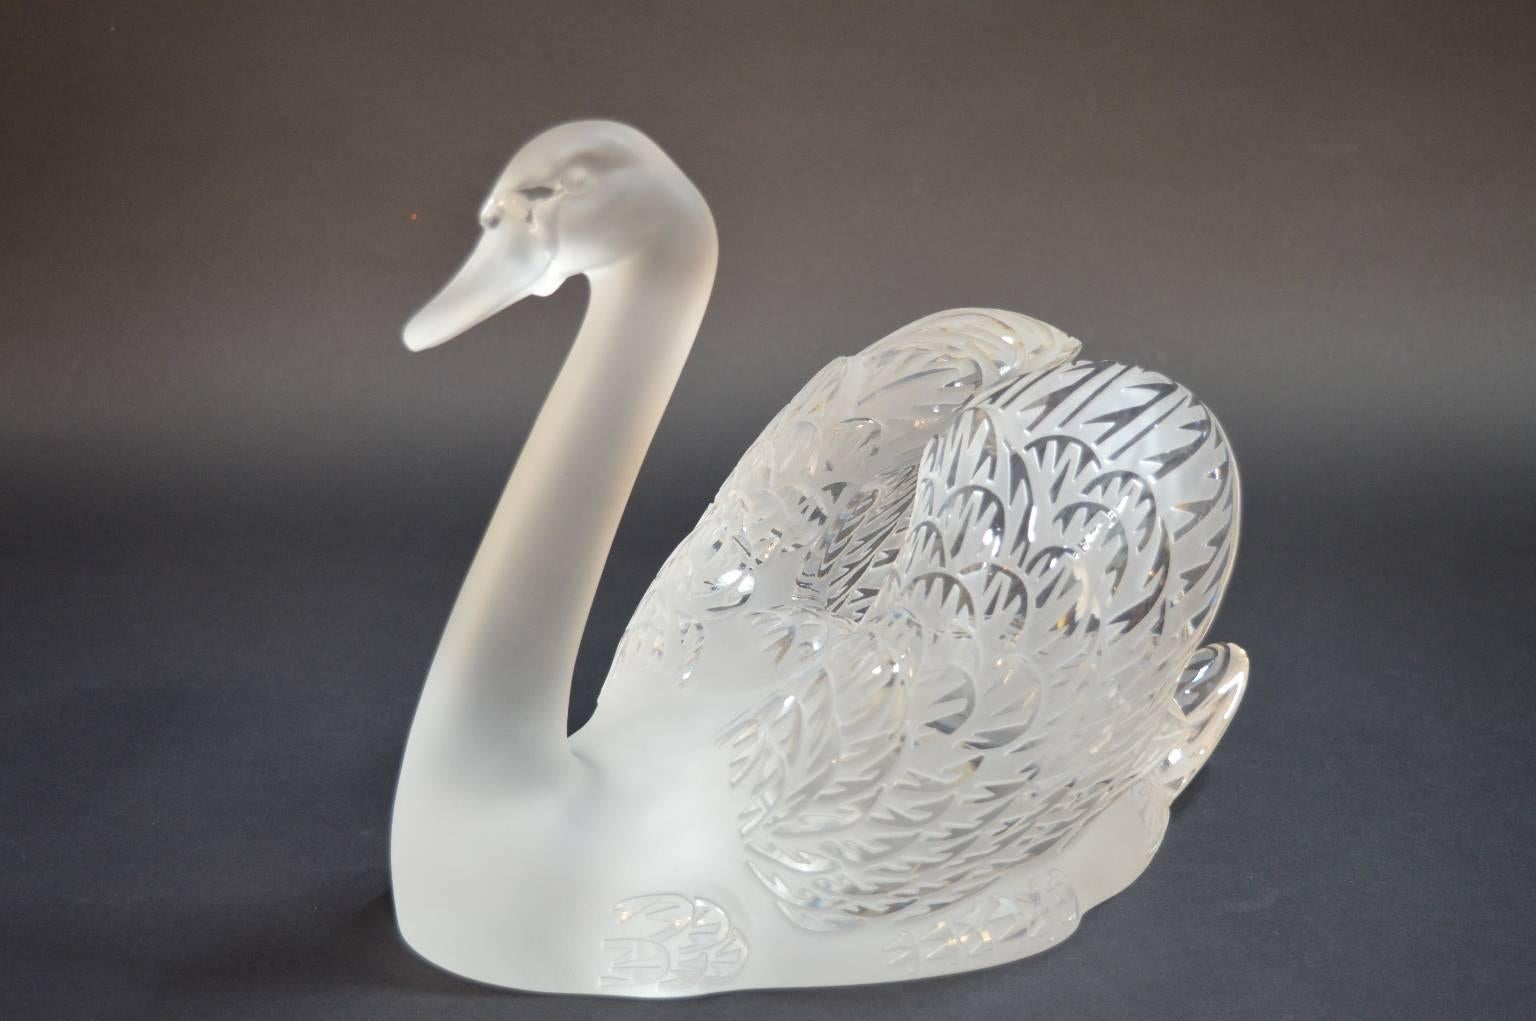 An amazing pair of Lalique crystal swans -- one swan has its neck down and the other upright. Signed Lalique France. Measurement are:

Reclining neck swan: 14.25